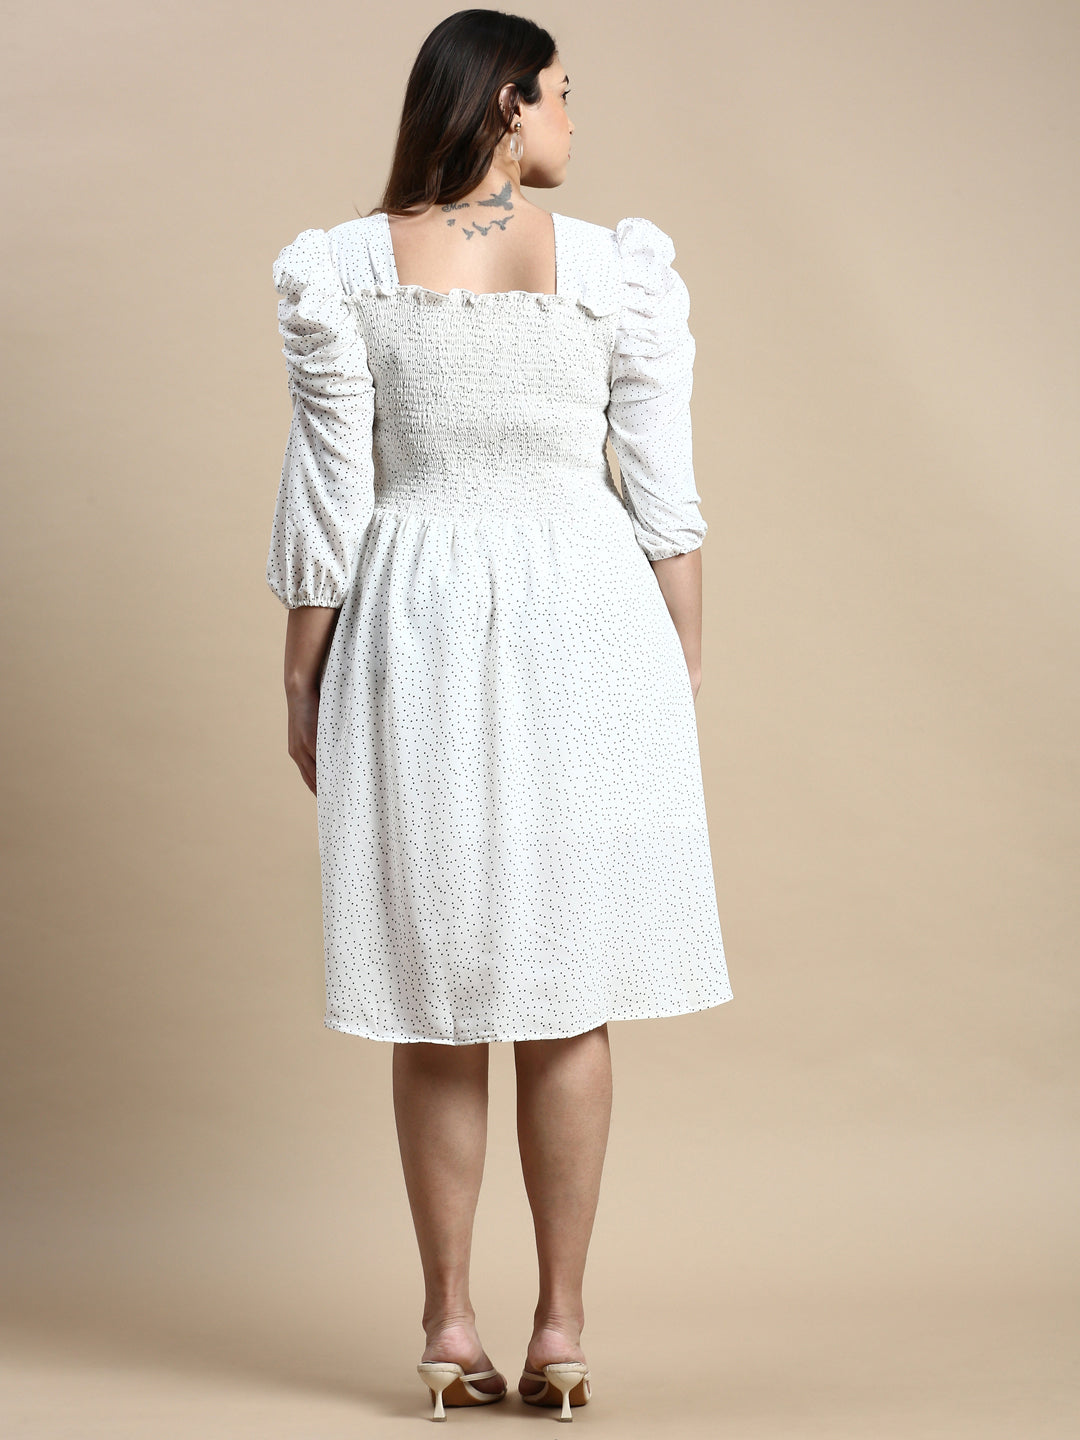 Women Puff White Polka Dots Fit and Flare Dress